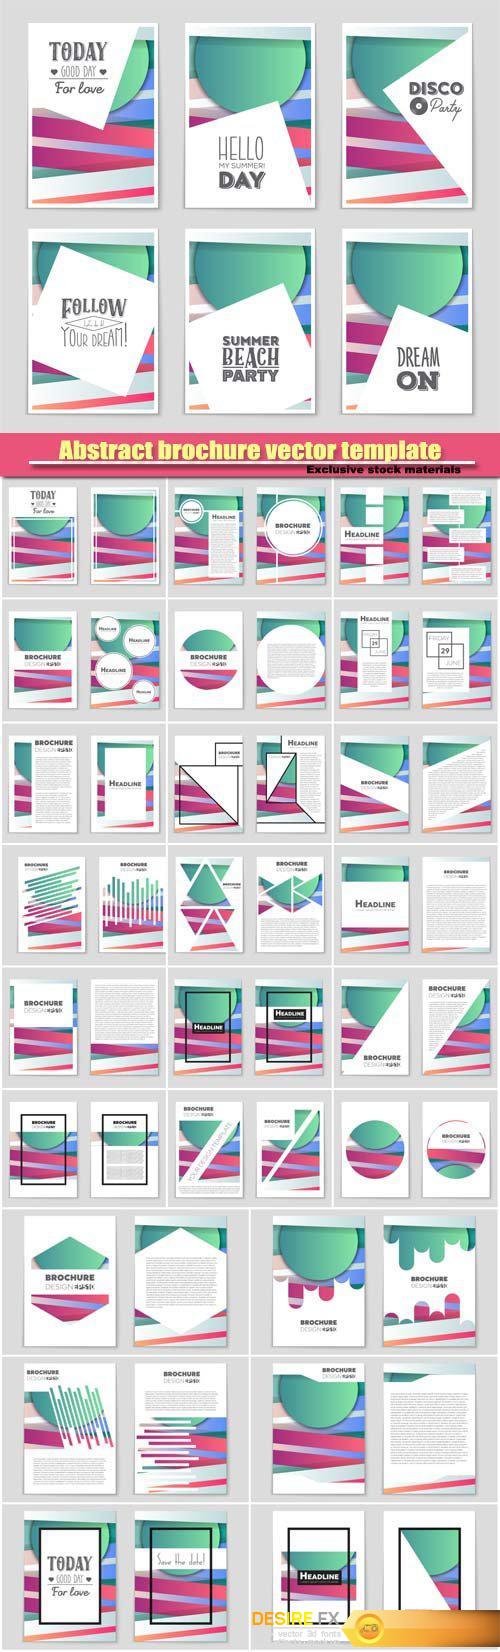 Abstract brochure vector template, design layout background set